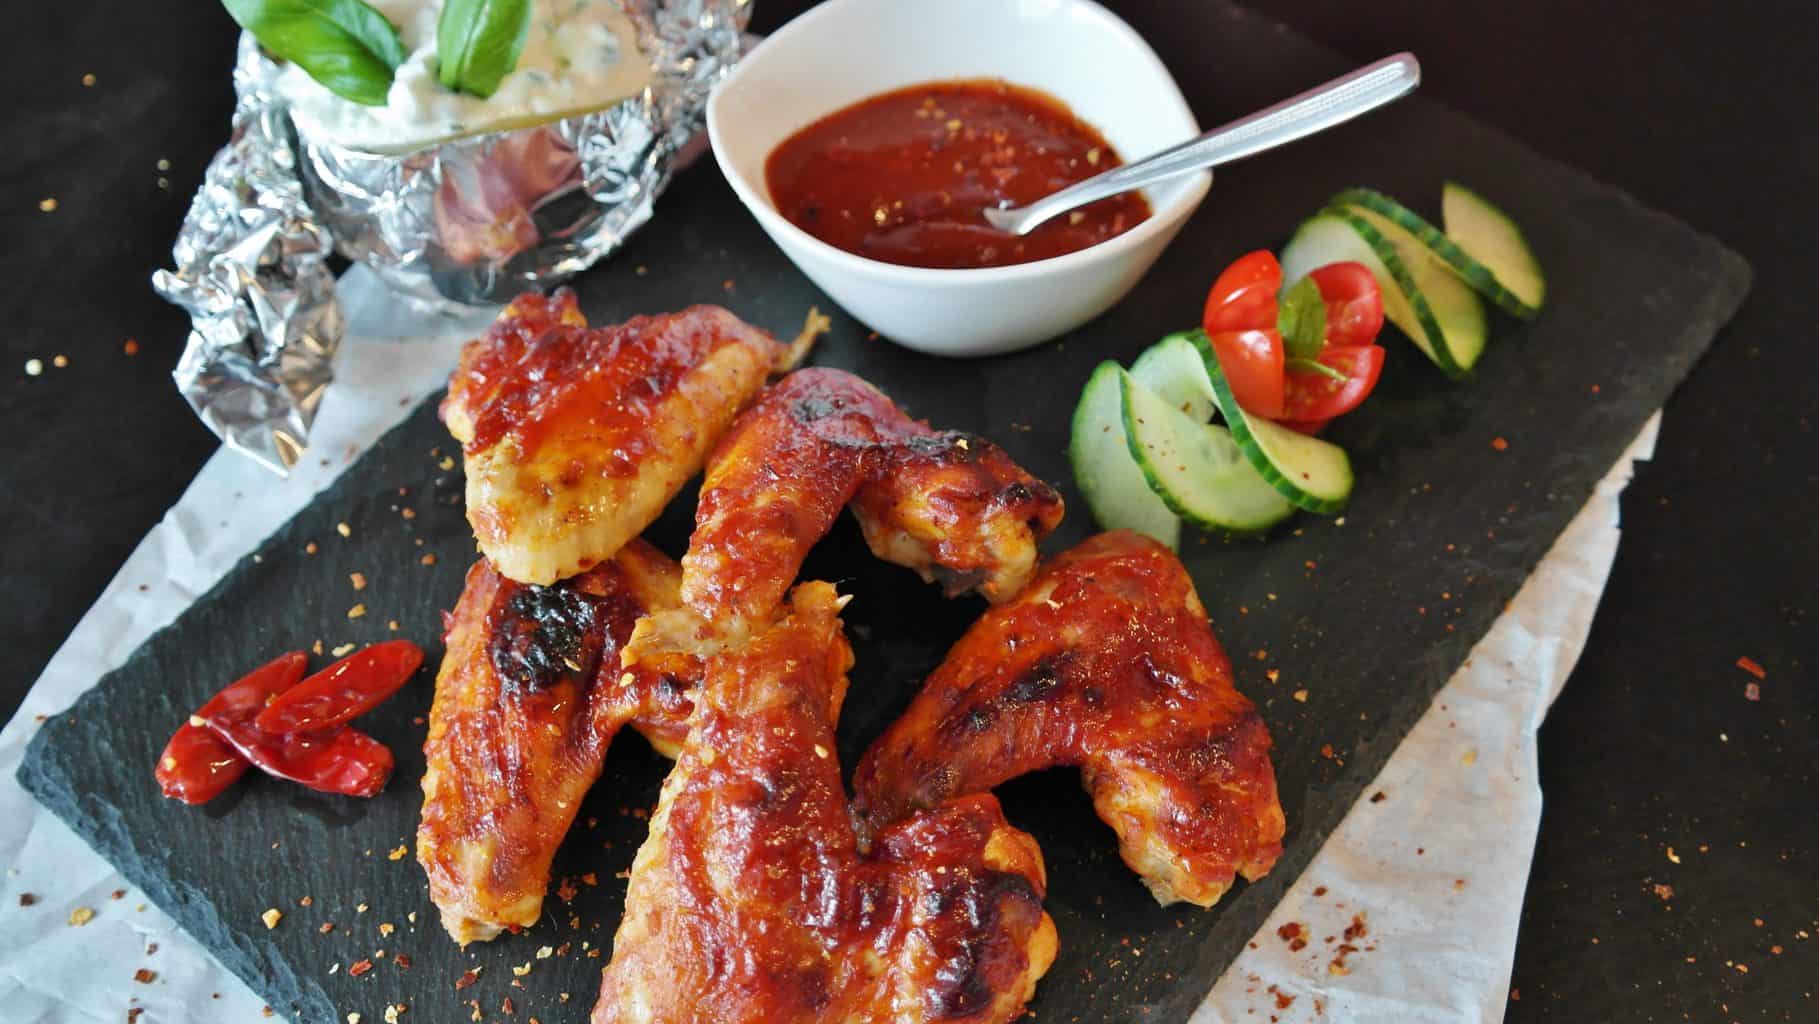 Barbecue flavored chicken wings with sauce